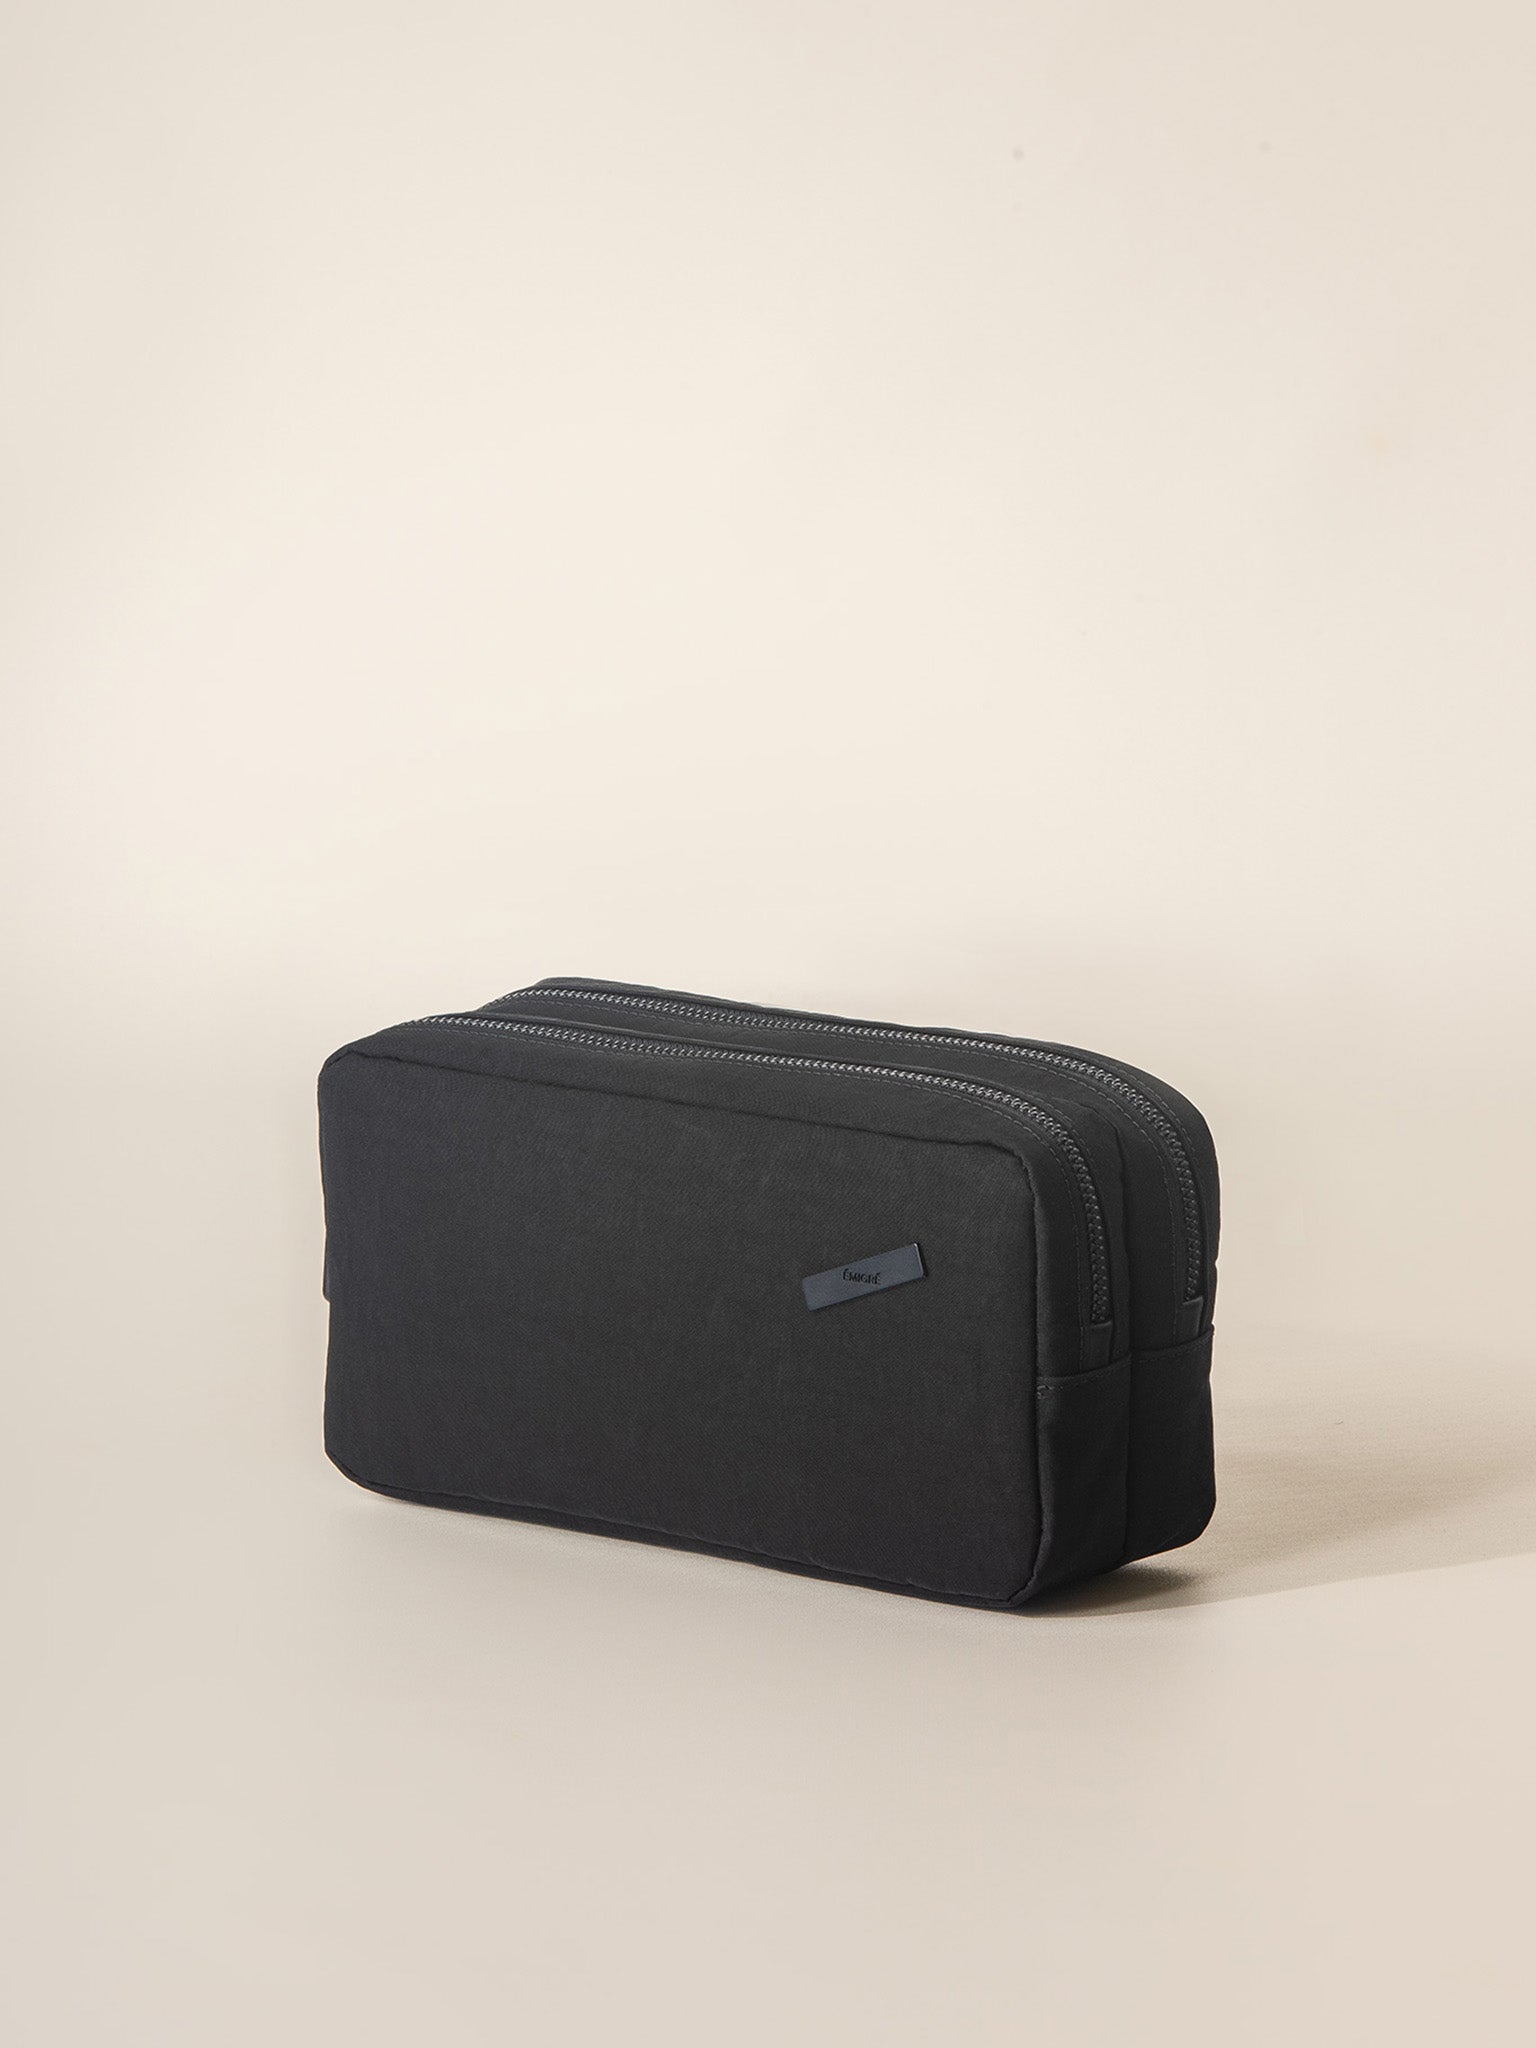 A compact travel washbag for men and women, with multiple compartments for storing toiletries and grooming essentials.